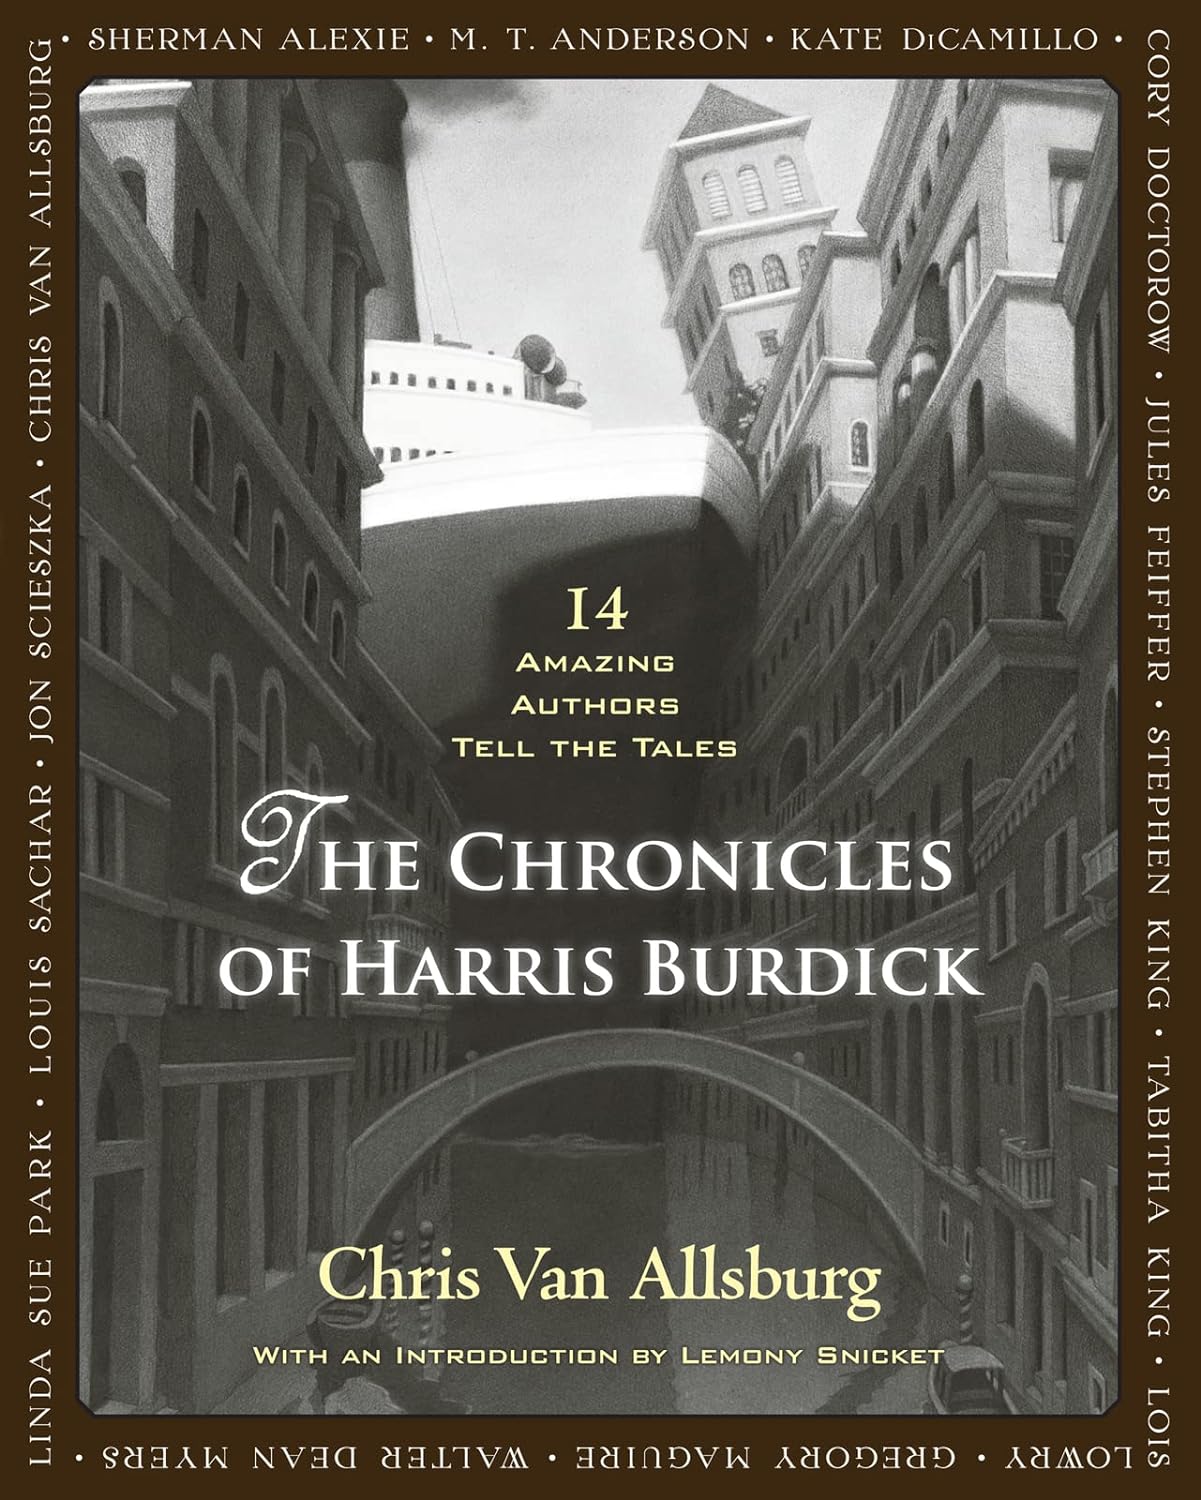 image is the Book Cover for "The Chronicles of Harris Burdick" by Chris Van Allsburg and 14 authors 